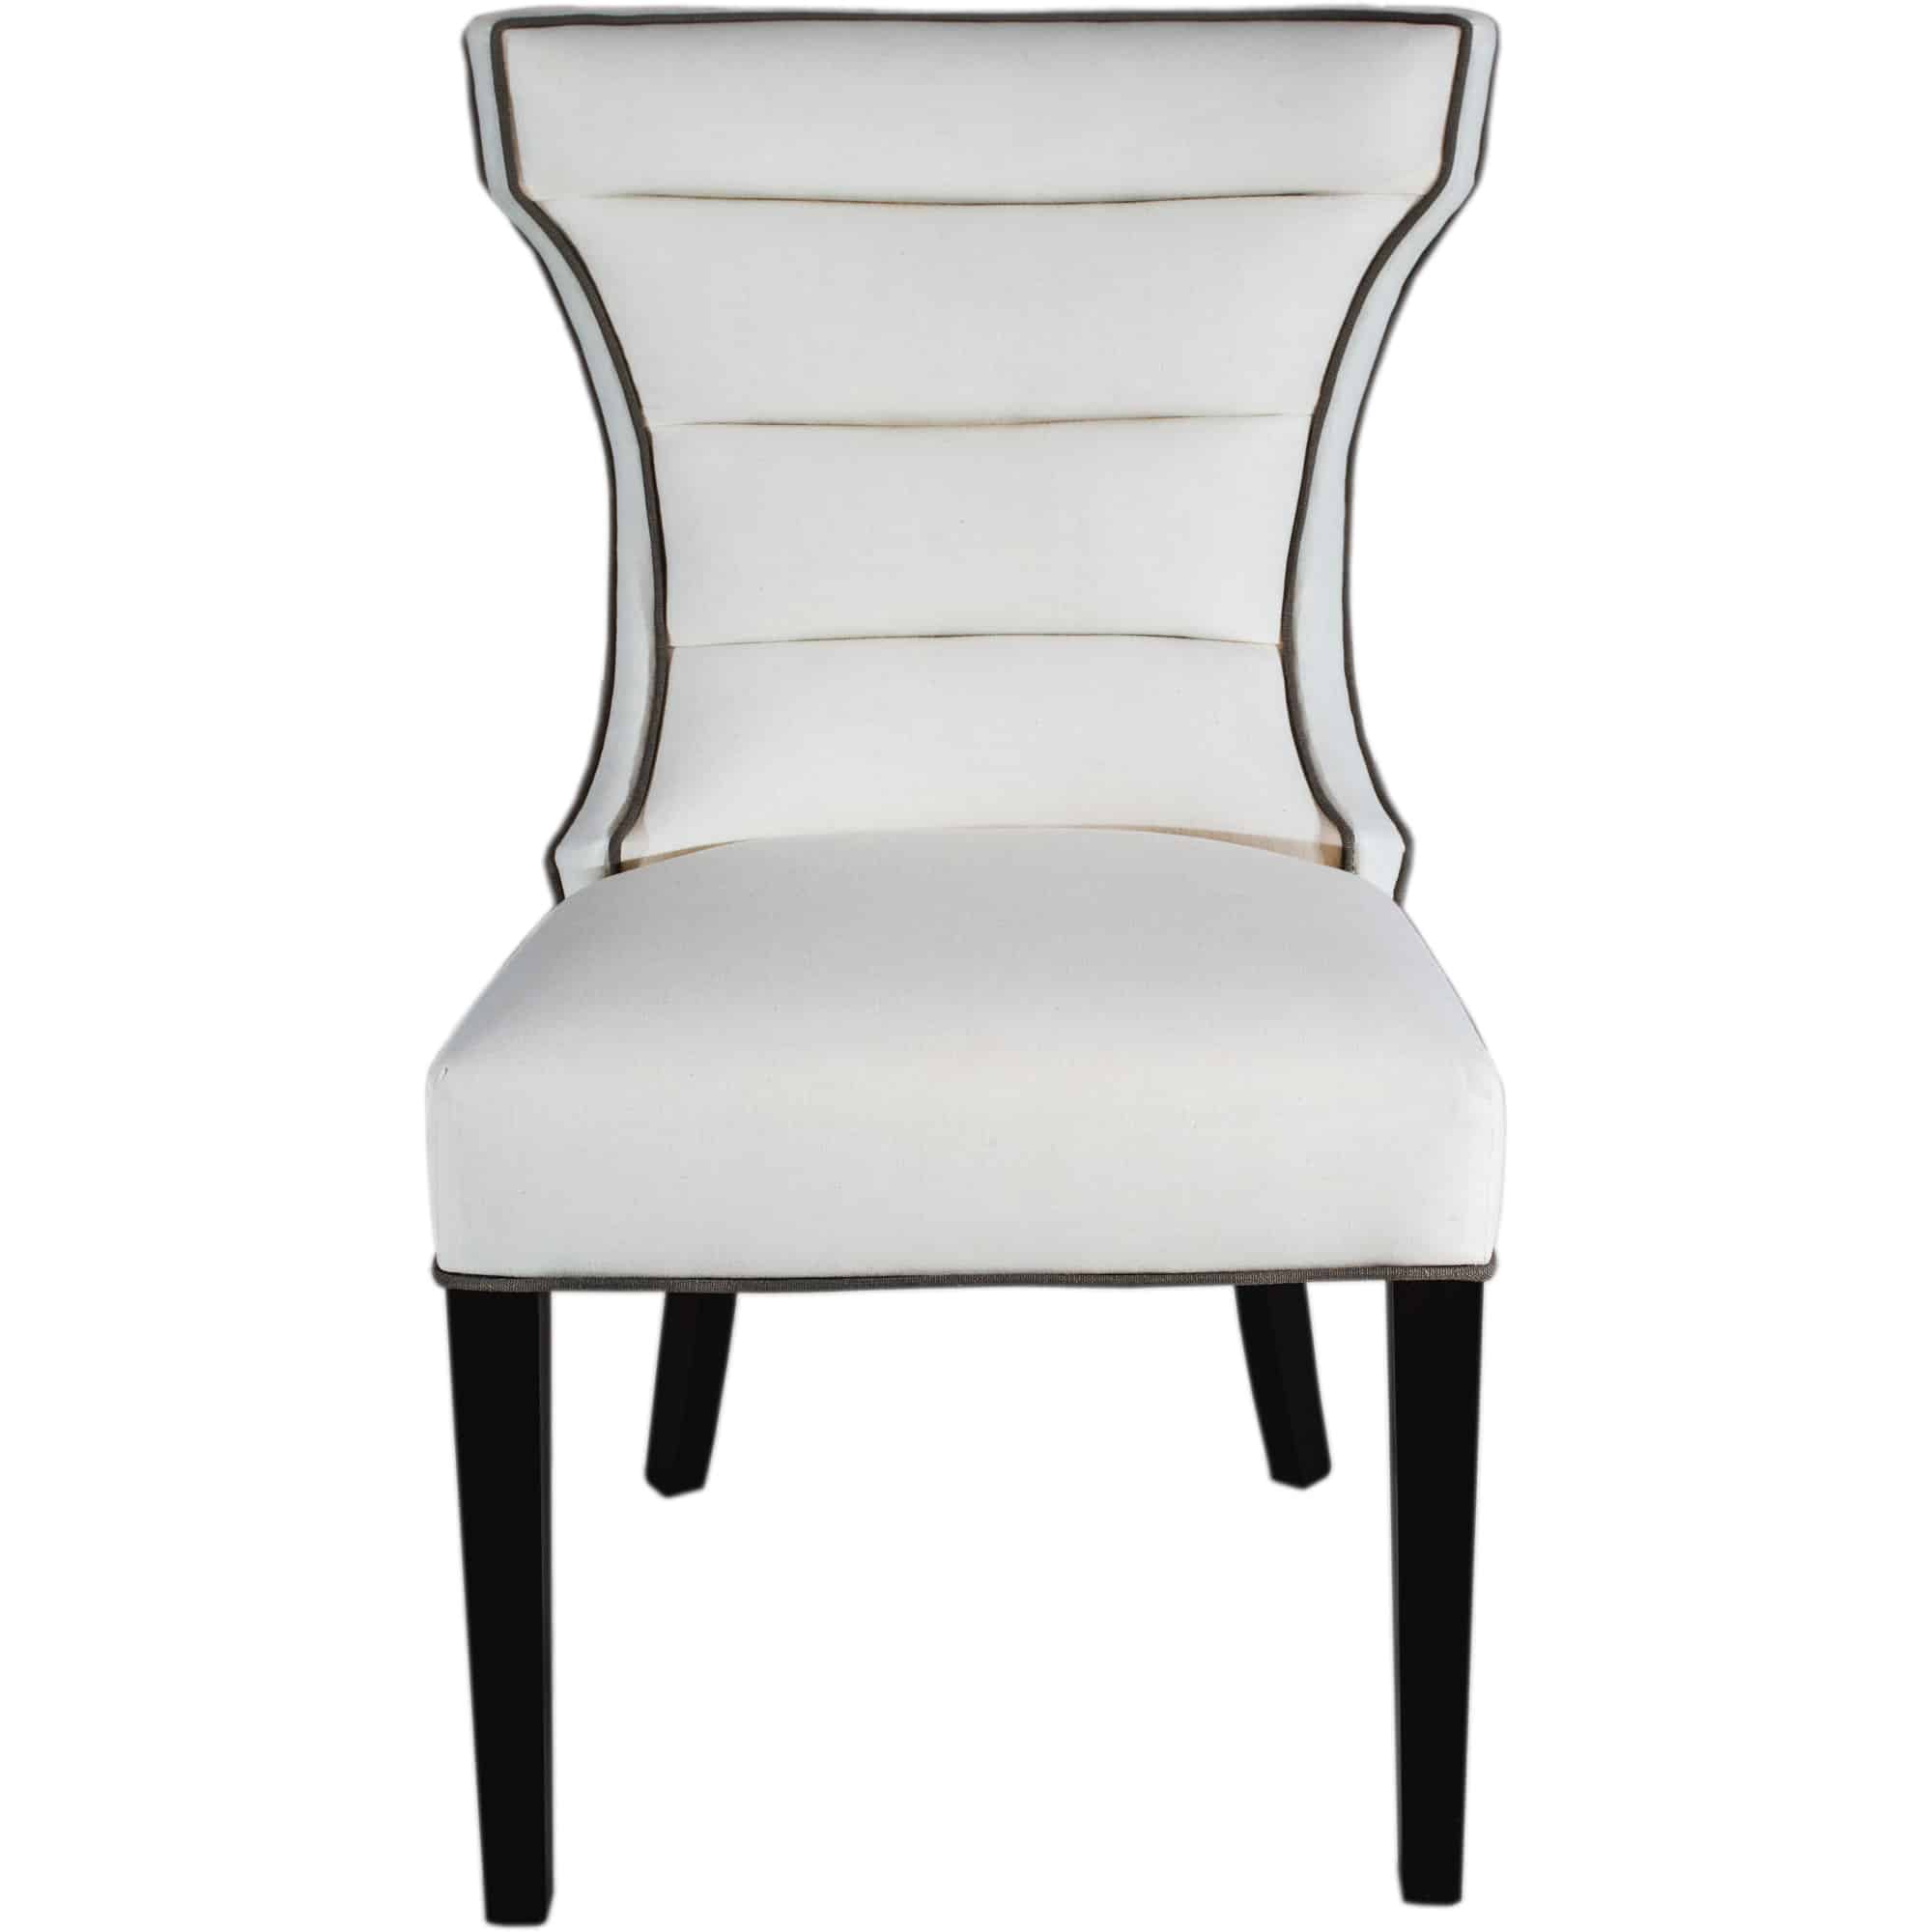 Bolton Dining Chair on white